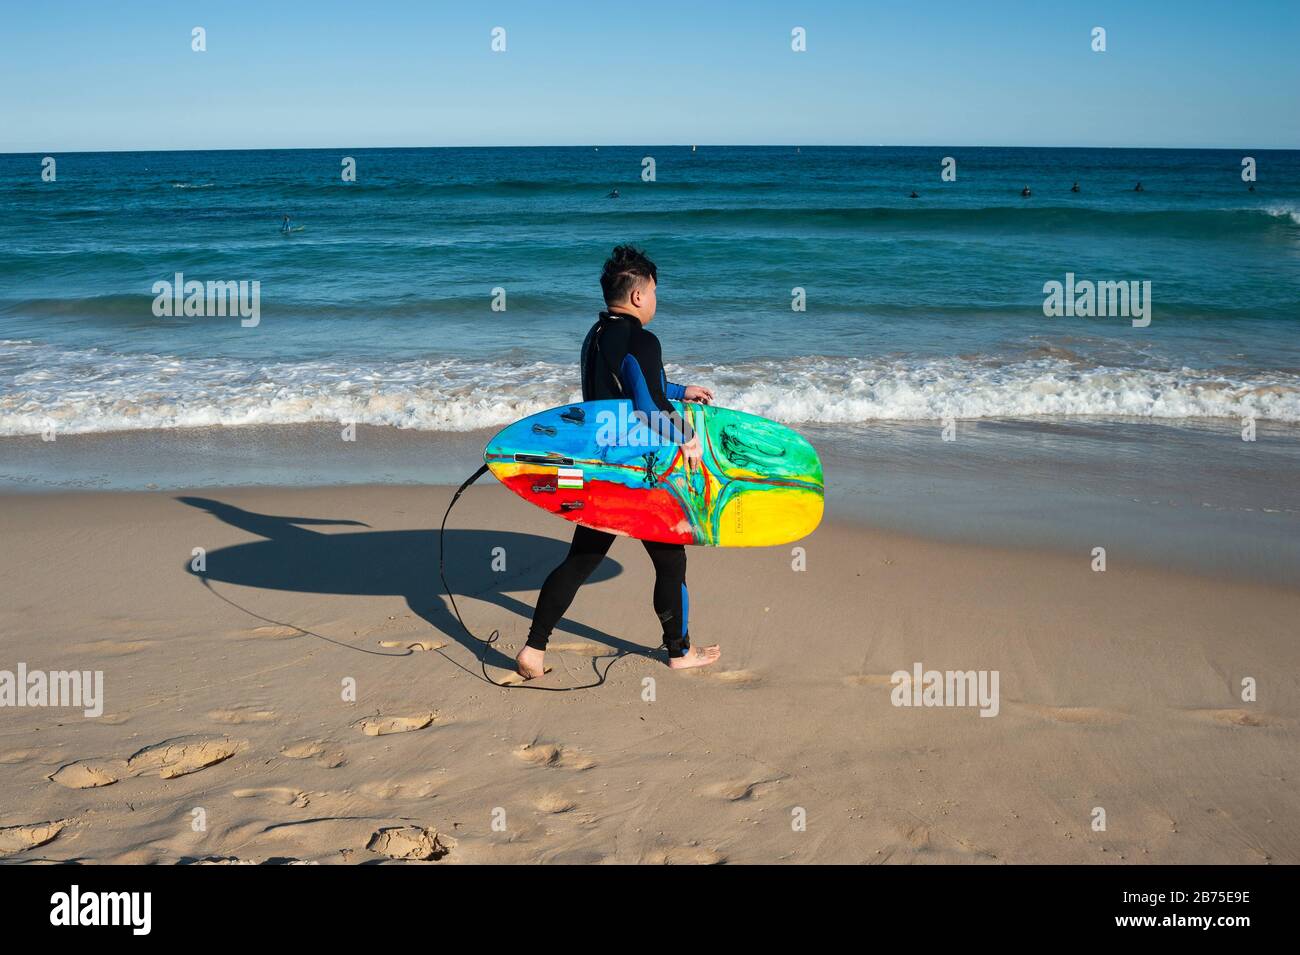 21.09.2018, Sydney, New South Wales, Australia - A surfer walks with his surfboard under his arm towards the sea at Bondi Beach. [automated translation] Stock Photo